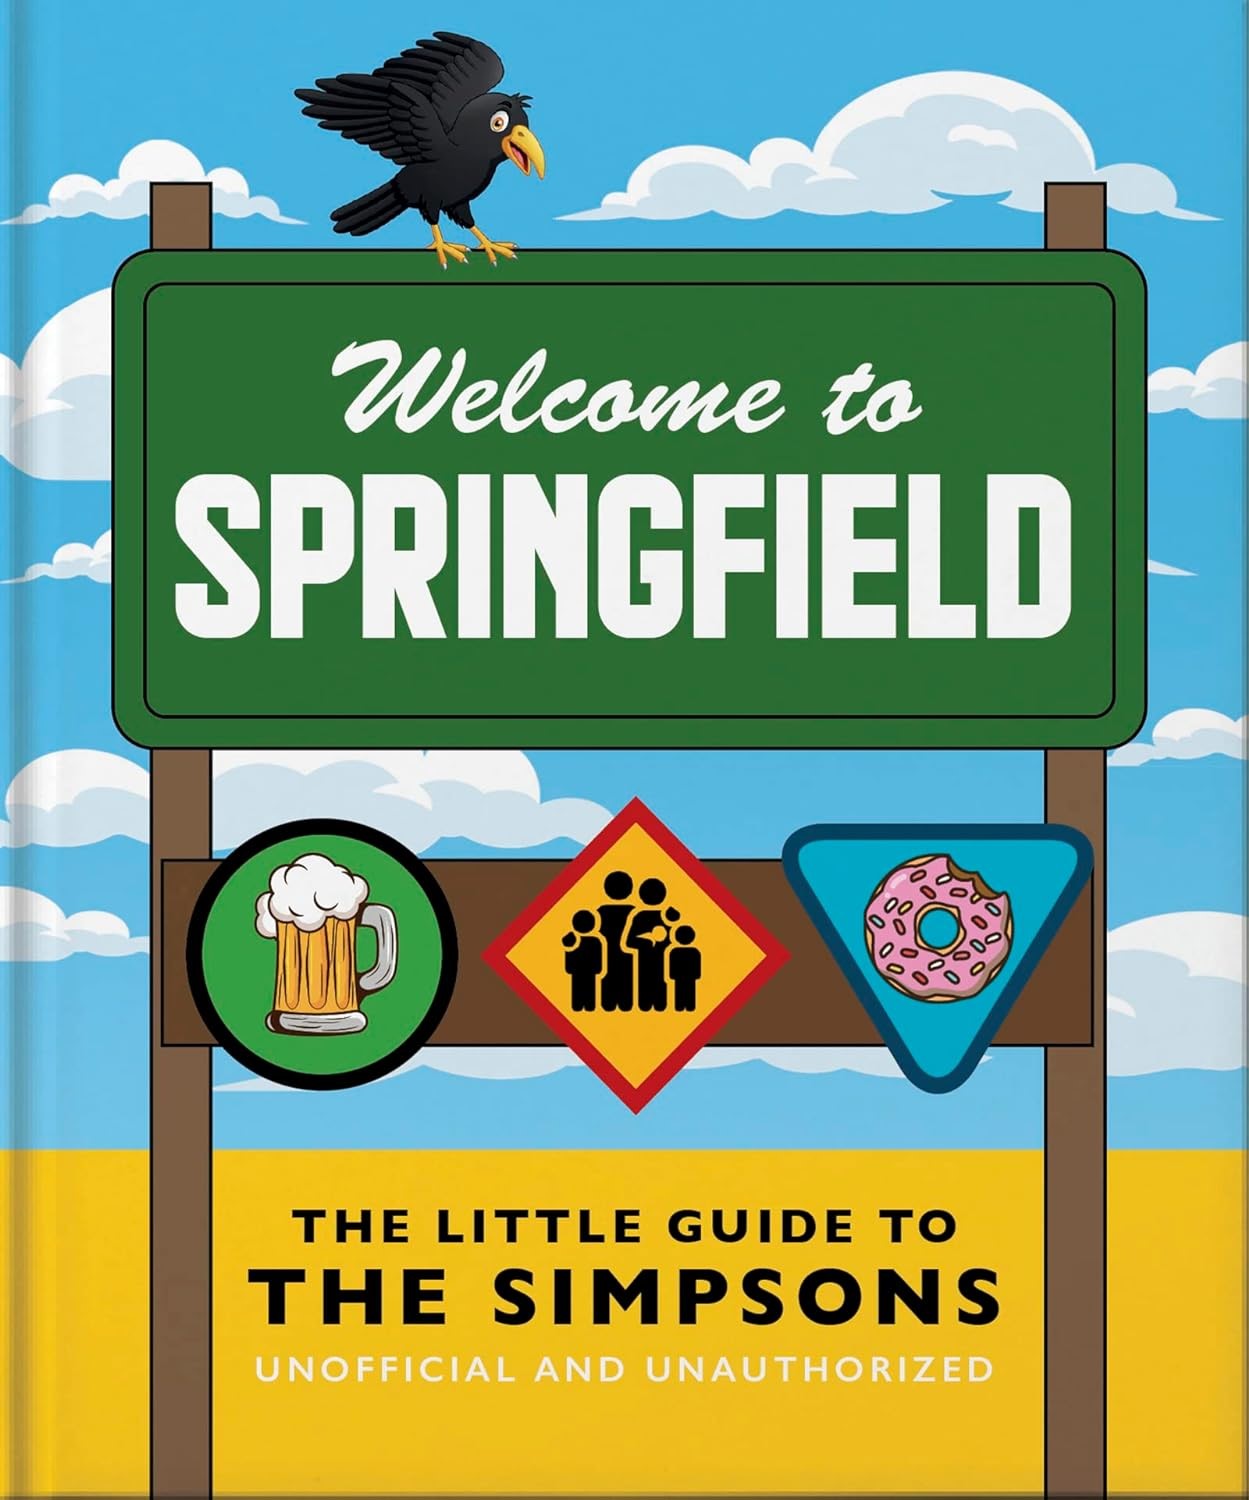 The Little Guide to The Simpsons